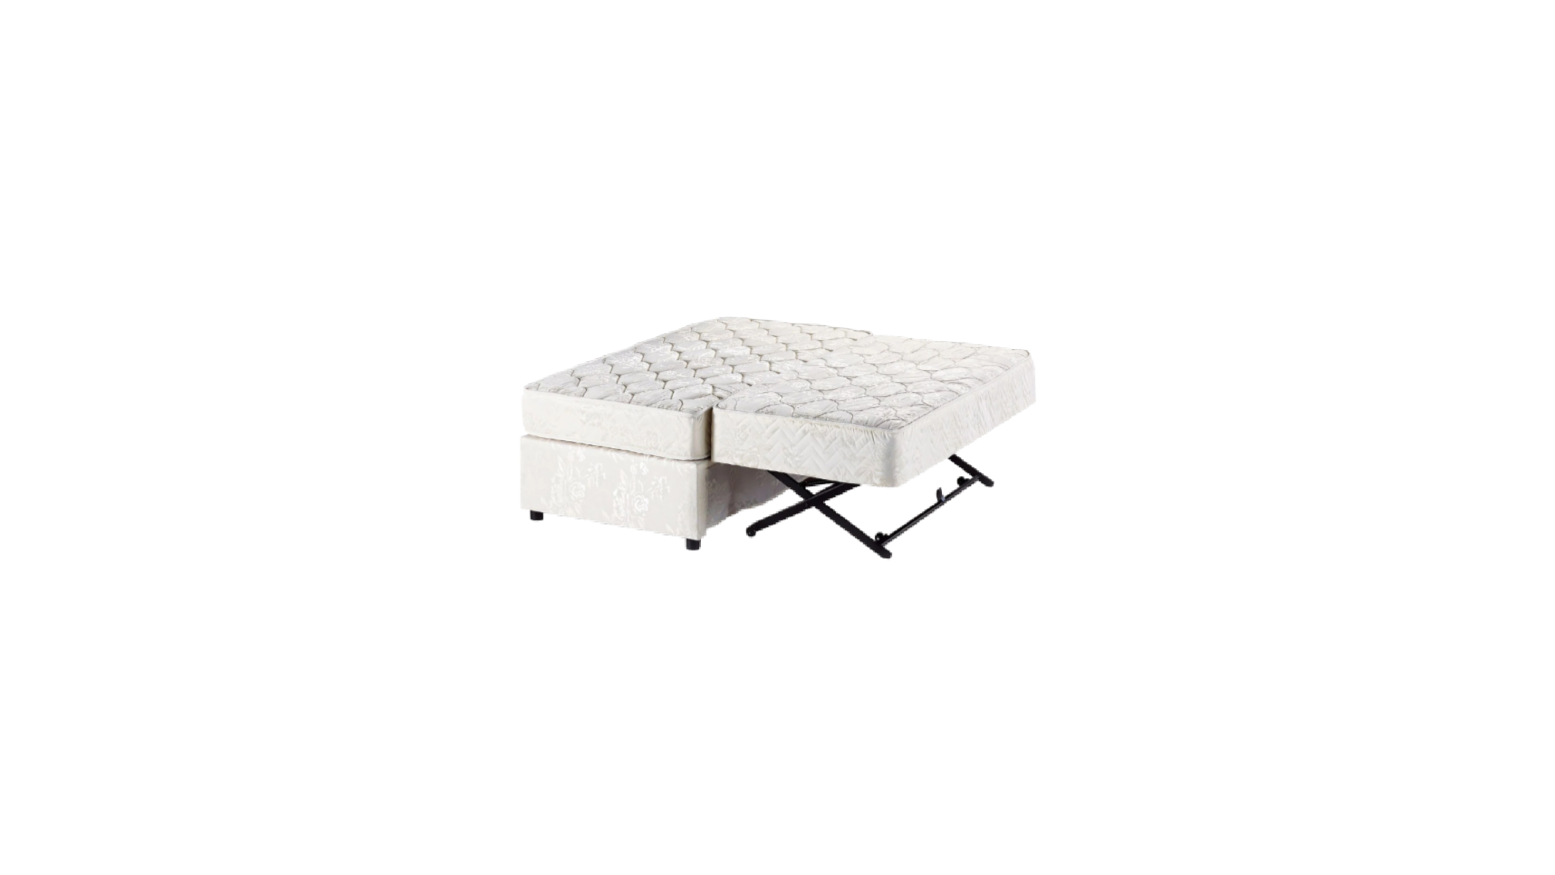 Alize High Riser with Extra Mattress - Home Store Furniture